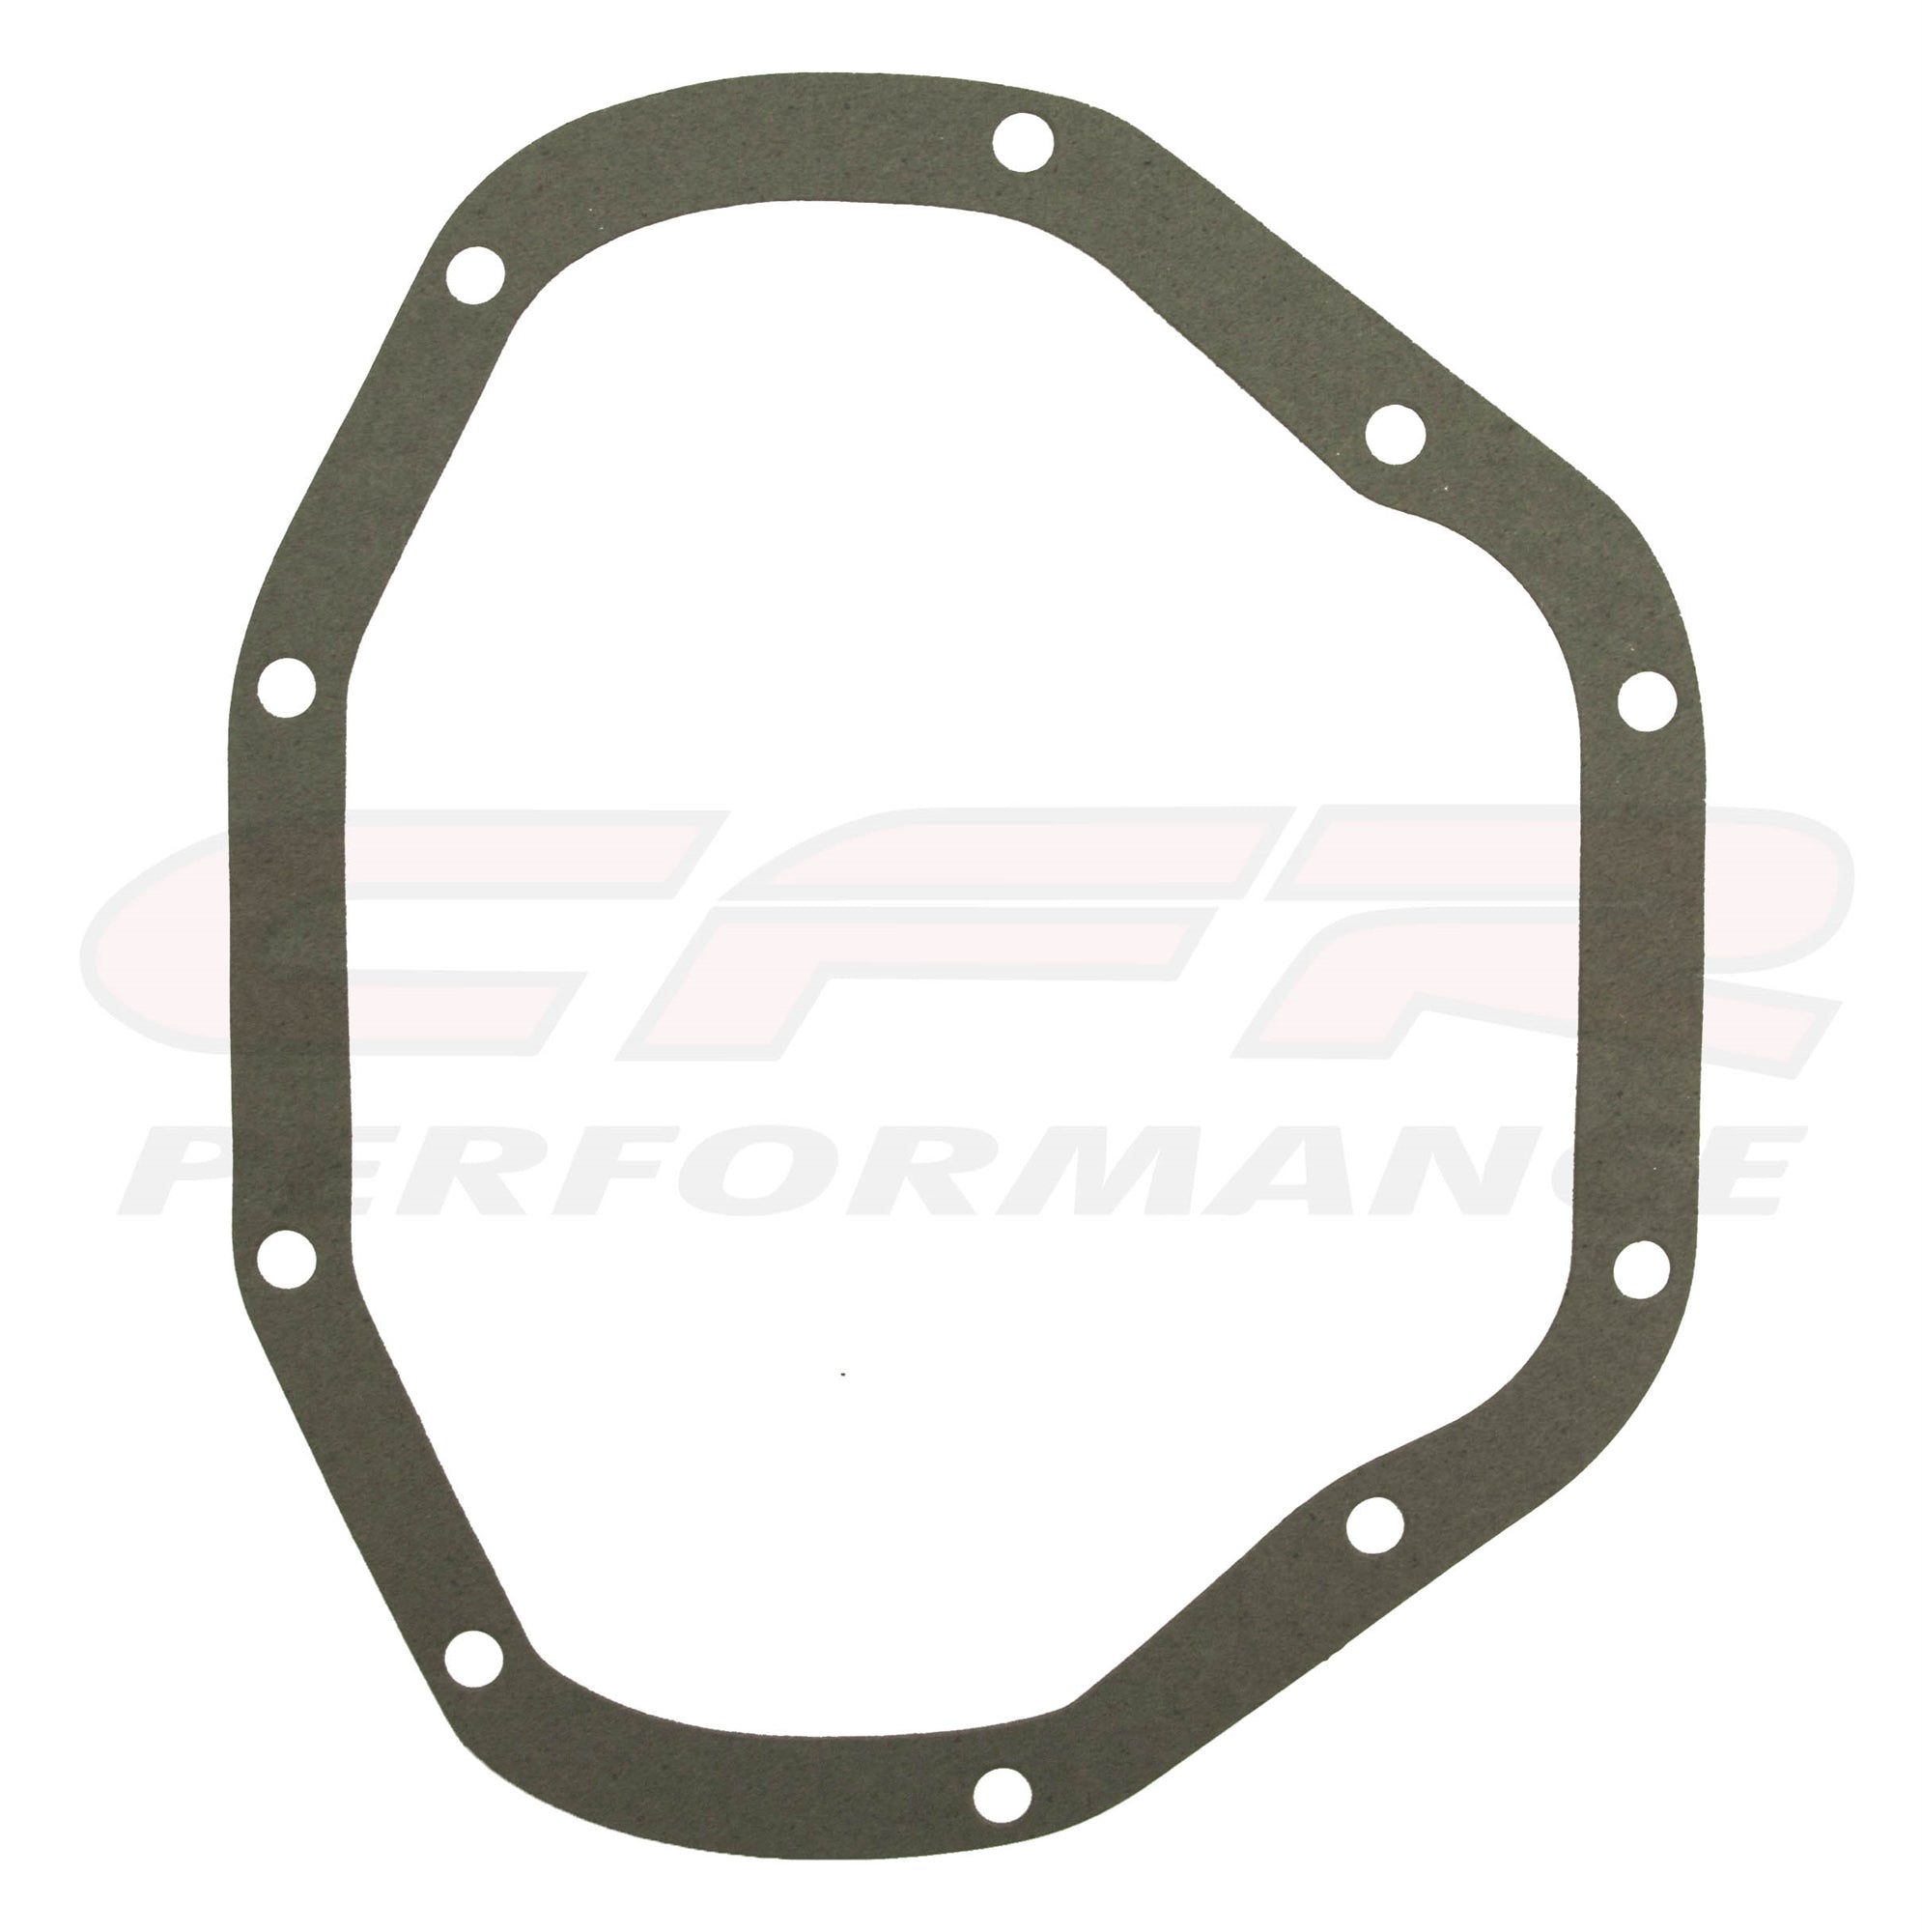 Rear End Differential Cover Gasket Fits Dana 80 10 Bolts Gray Fiber 